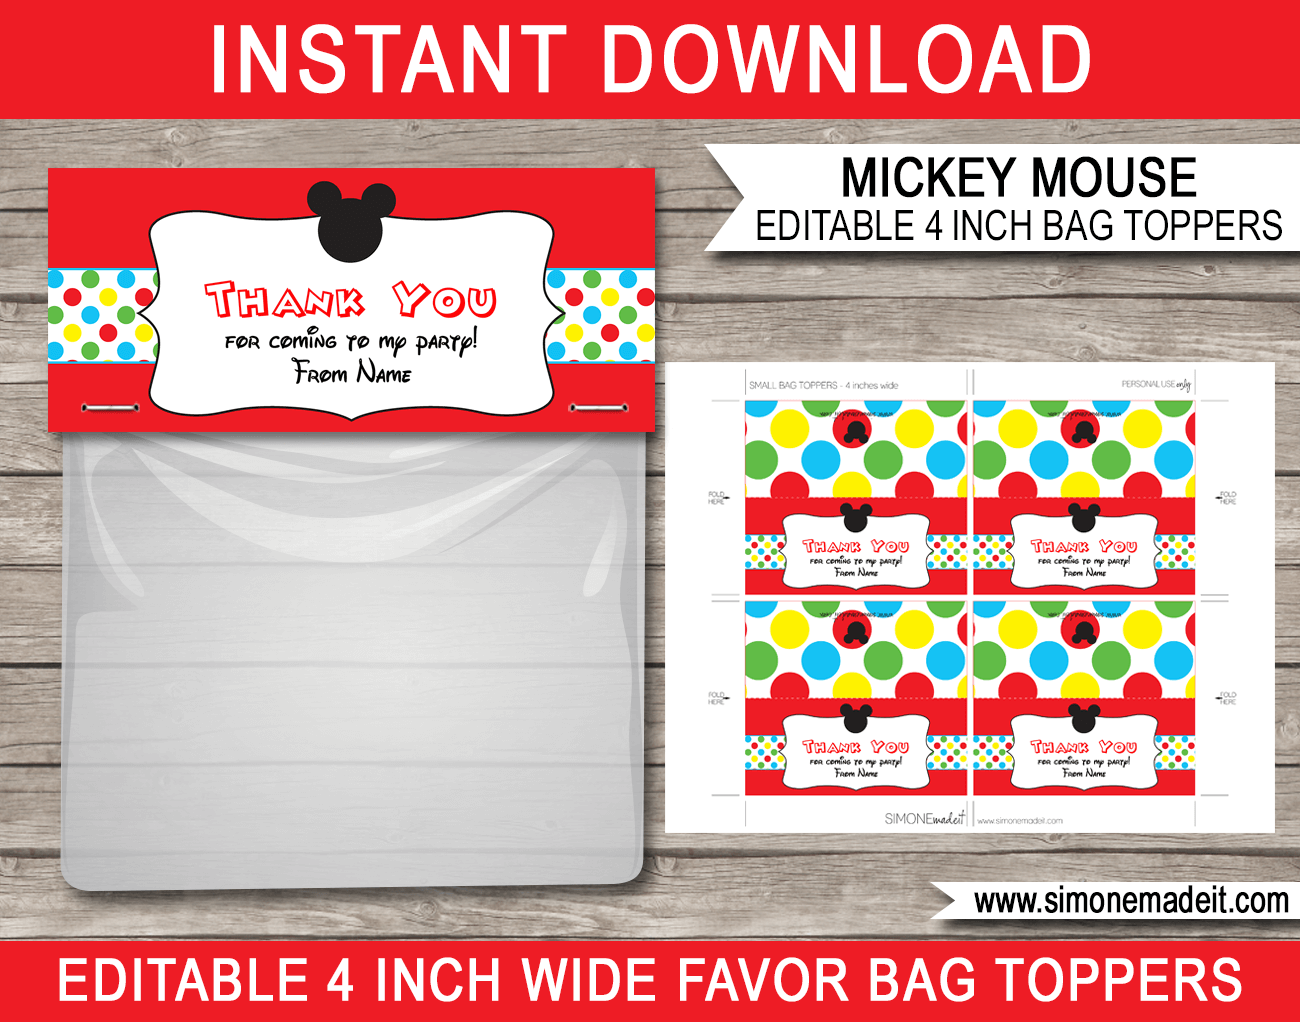 Editable Mickey Mouse Party Favor Bag Toppers | Mickey Mouse Theme Birthday Party | Printable DIY Template | INSTANT DOWNLOAD via SIMONEmadeit.com